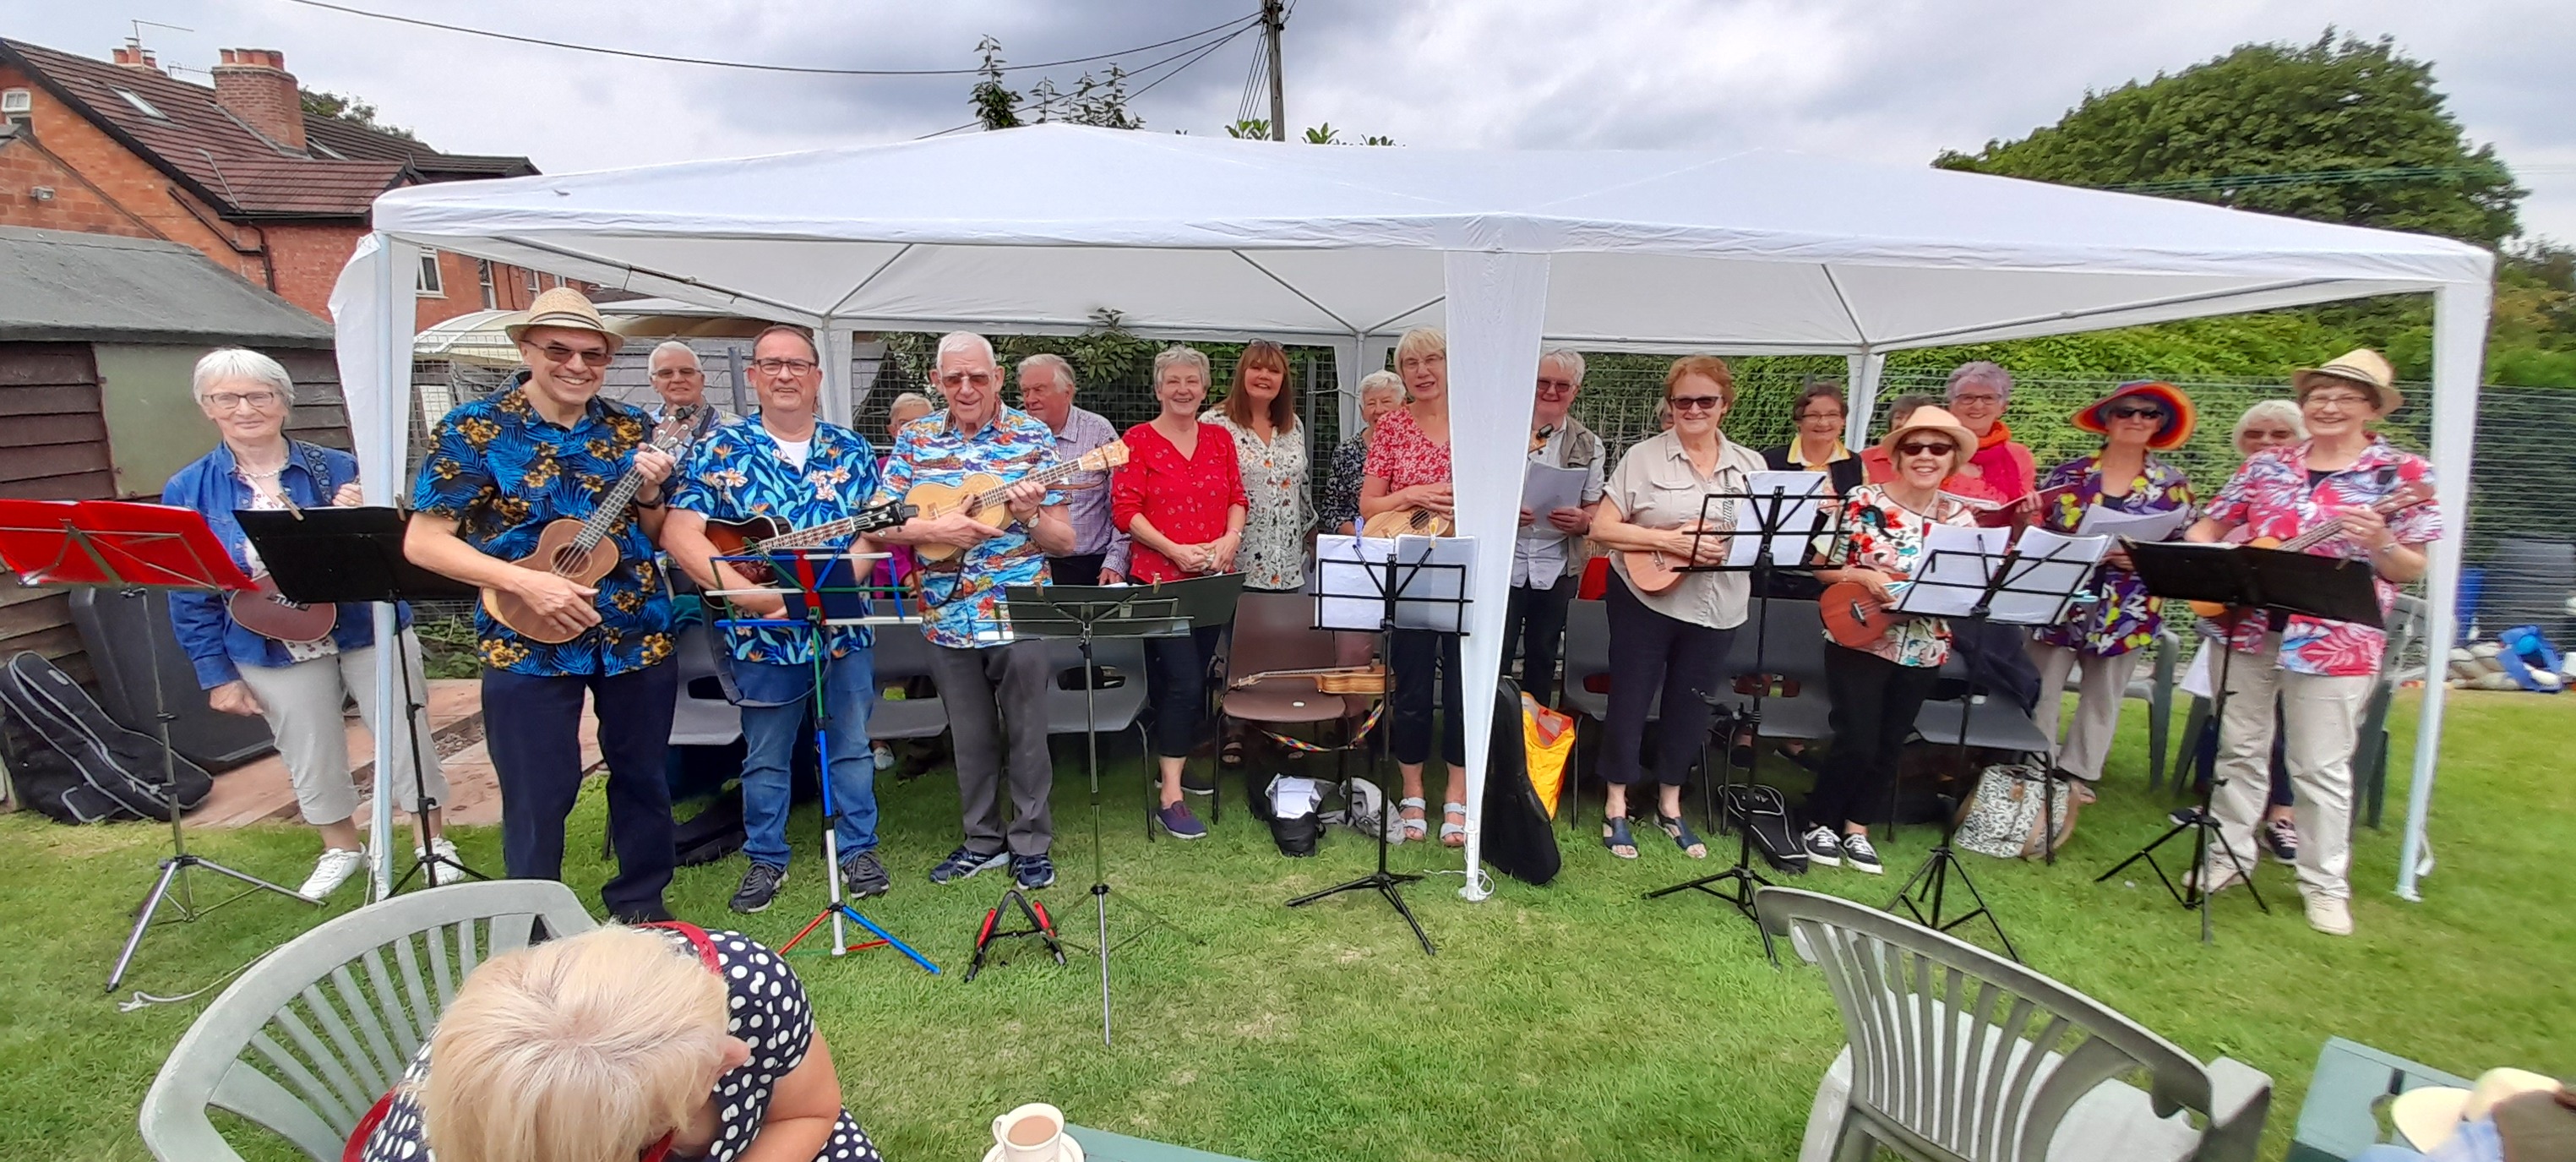 A gig for the Finstall Village Fete.